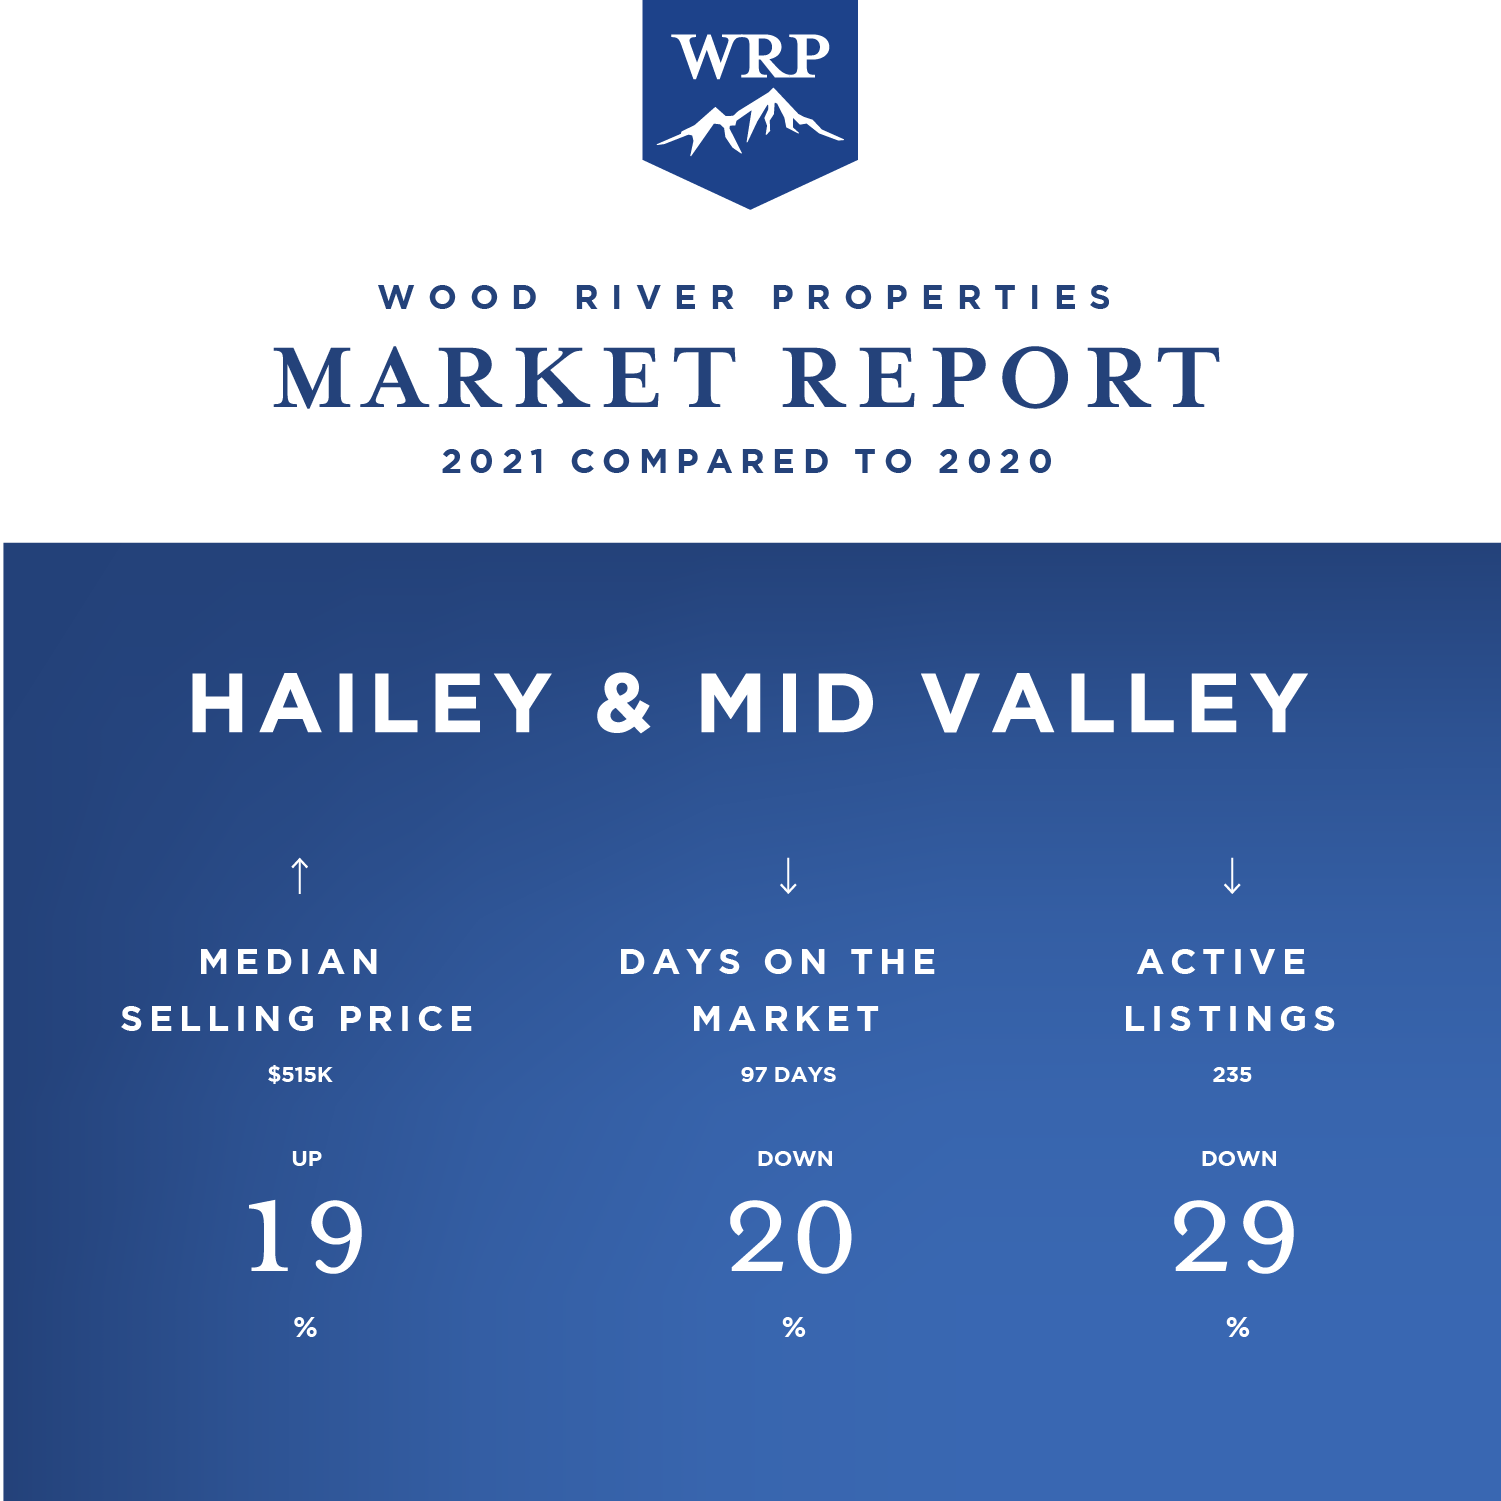 hailey-mid-valley-market-report-2021